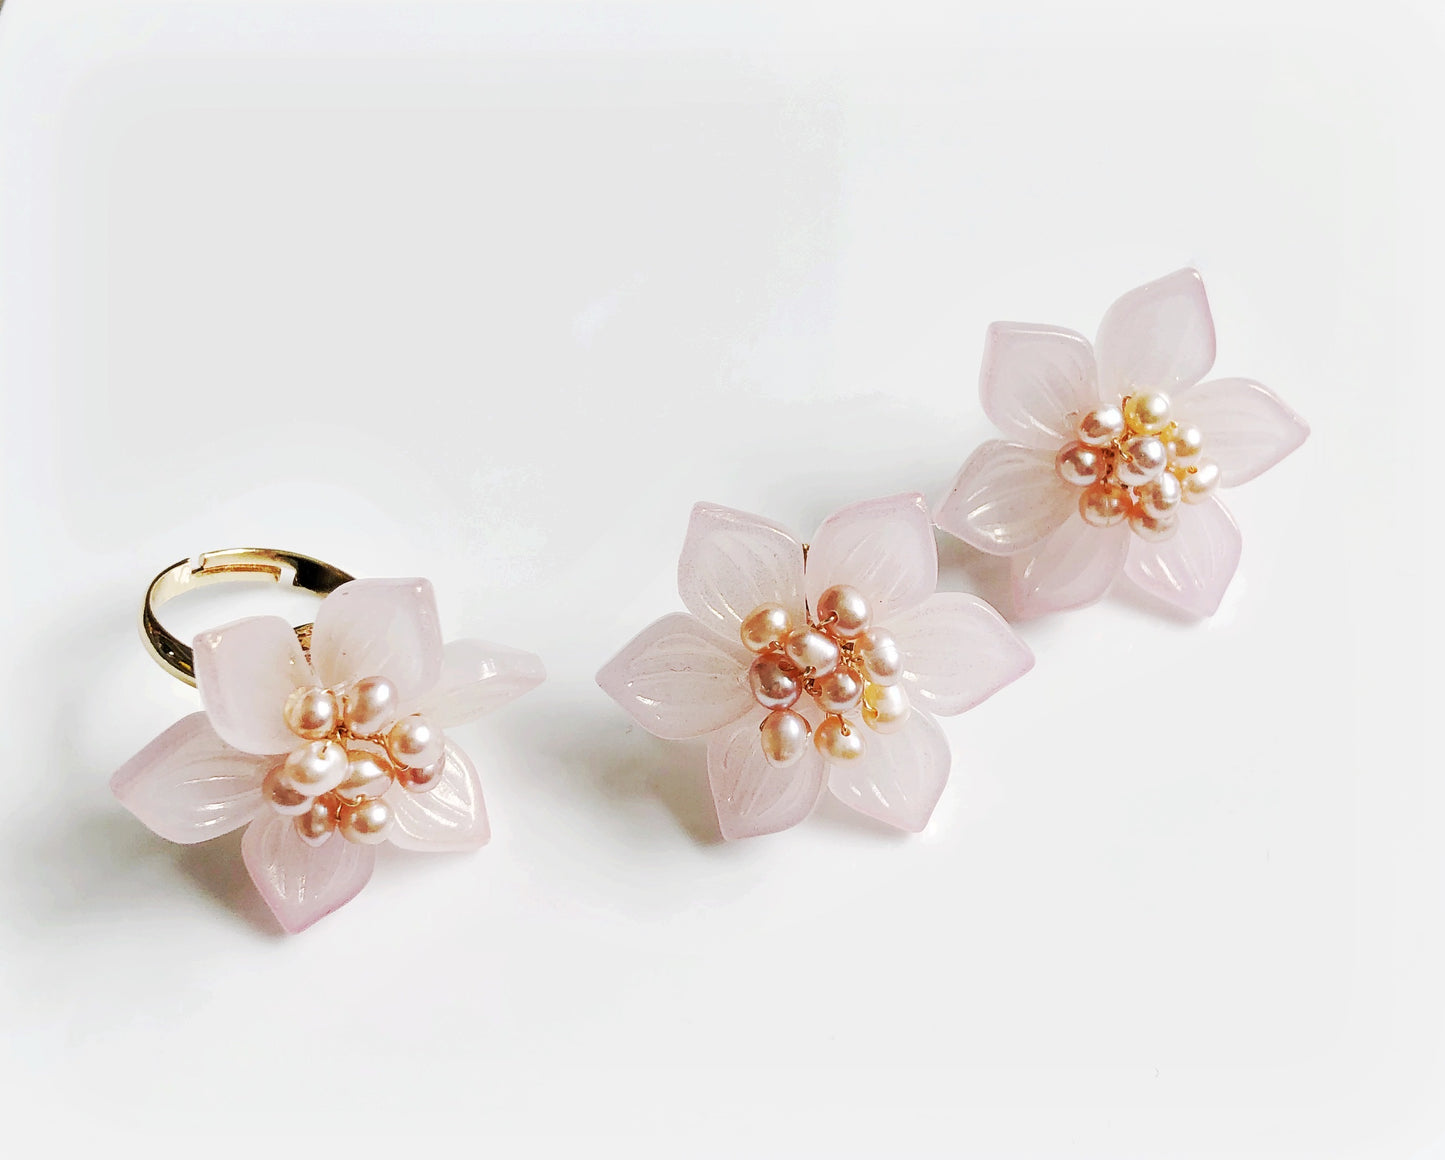 Soft pink baby lotus glass and freshwater pearls earrings